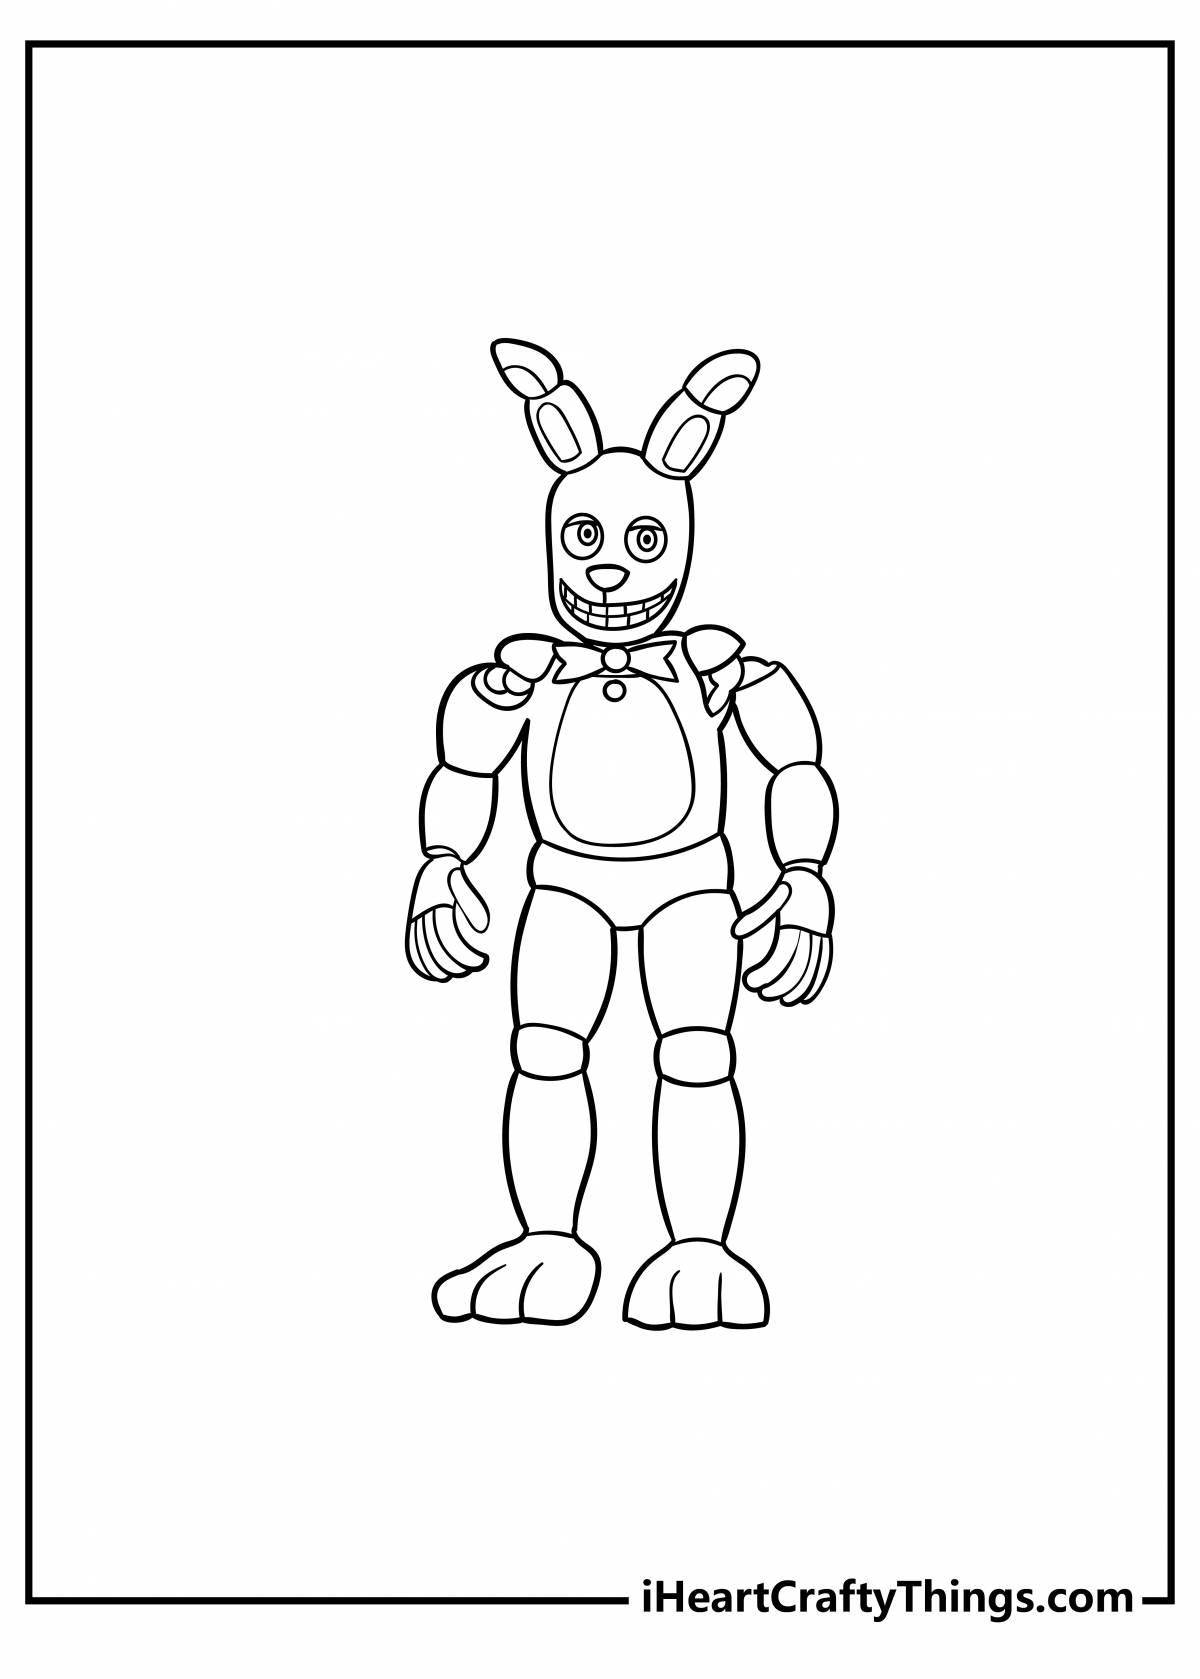 Animated dj coloring page